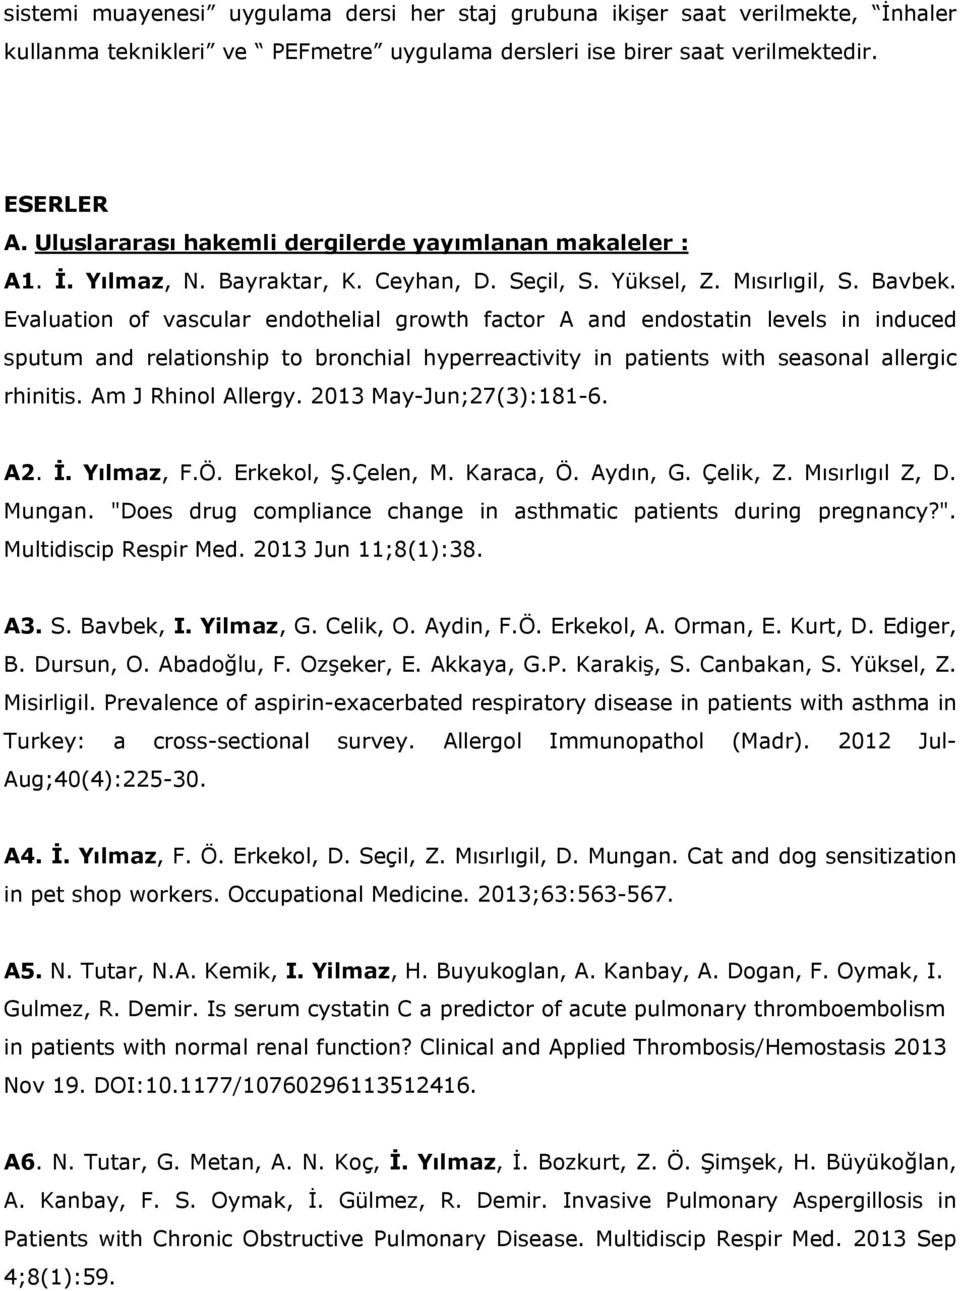 Evaluation of vascular endothelial growth factor A and endostatin levels in induced sputum and relationship to bronchial hyperreactivity in patients with seasonal allergic rhinitis.